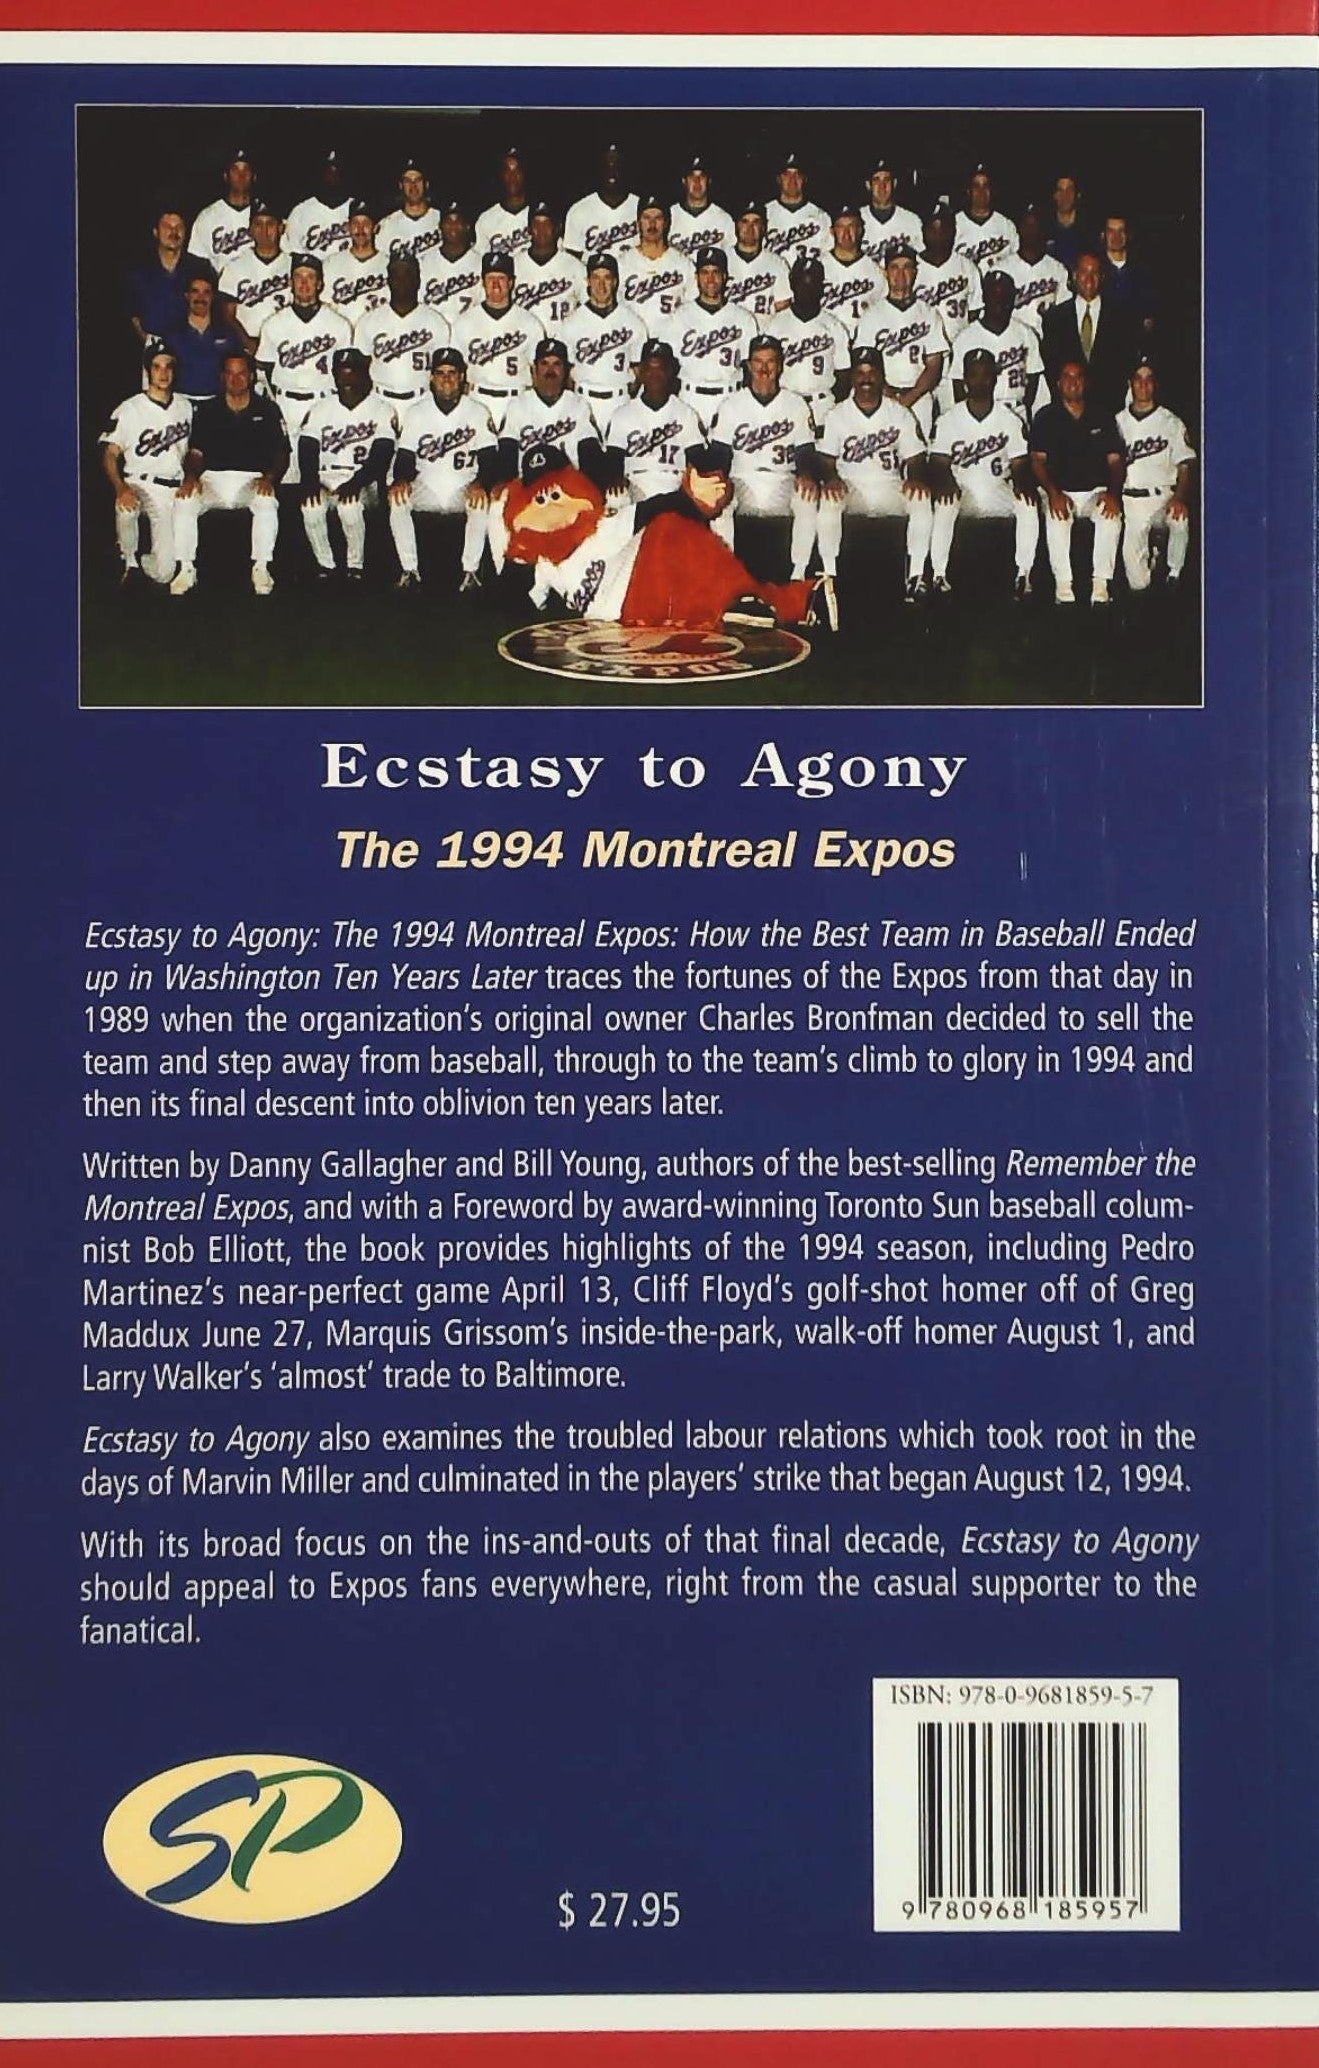 Ecstasy to Agony : The 1994 Montreal Expos (Danny Gallagher)